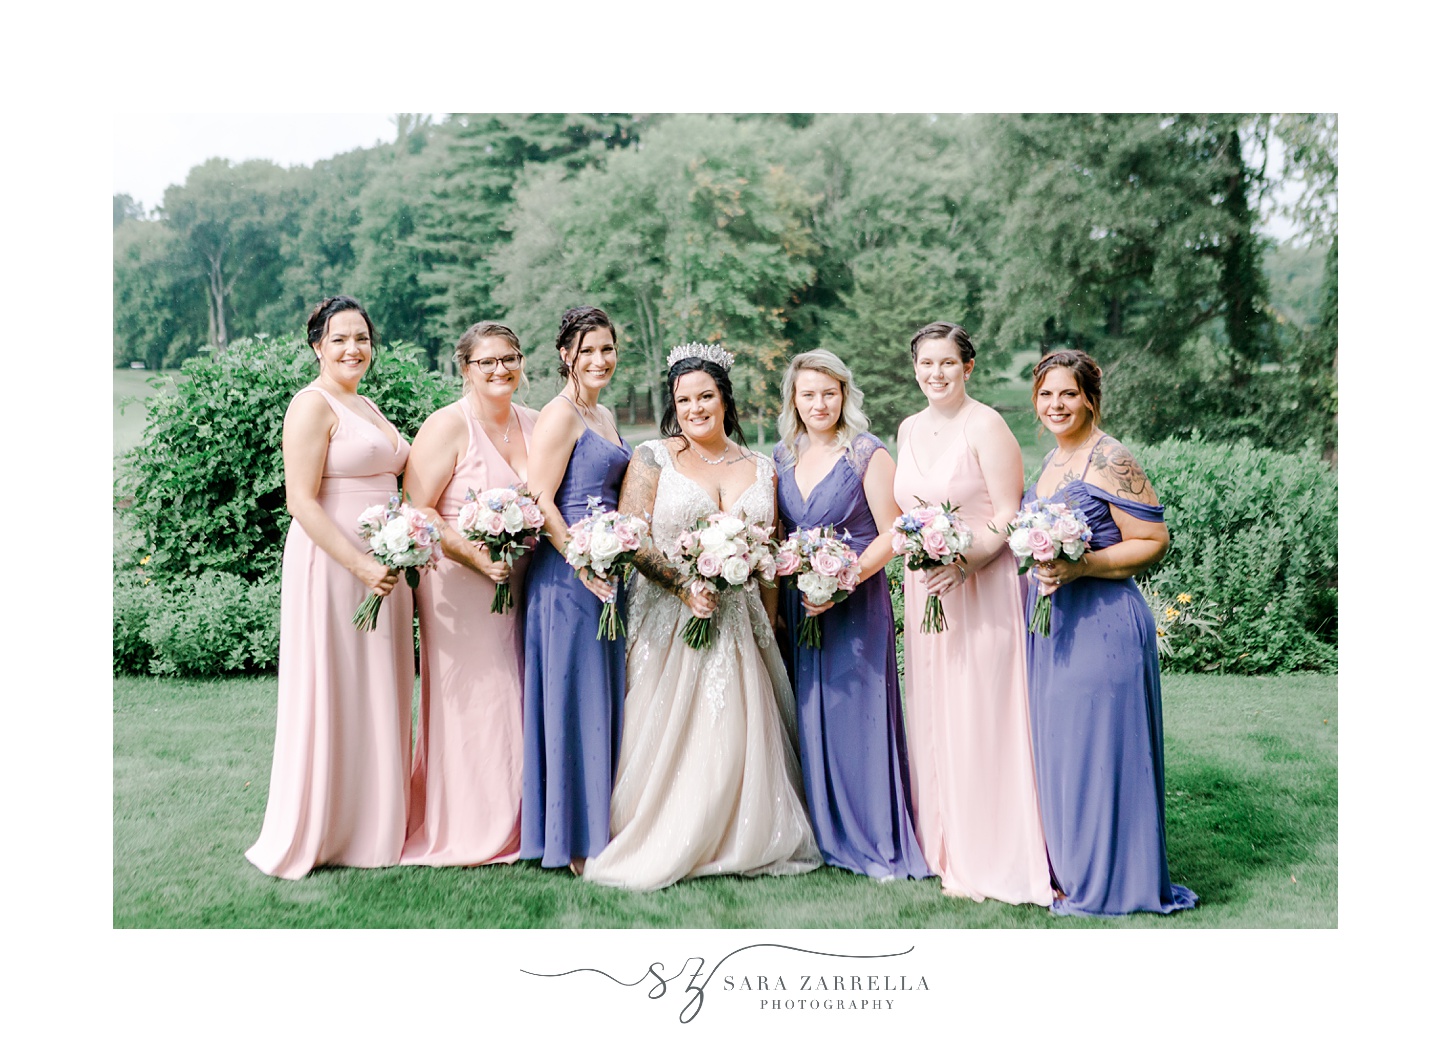 bride poses with bridesmaids in pink and purple gowns holding pink and white flowers 